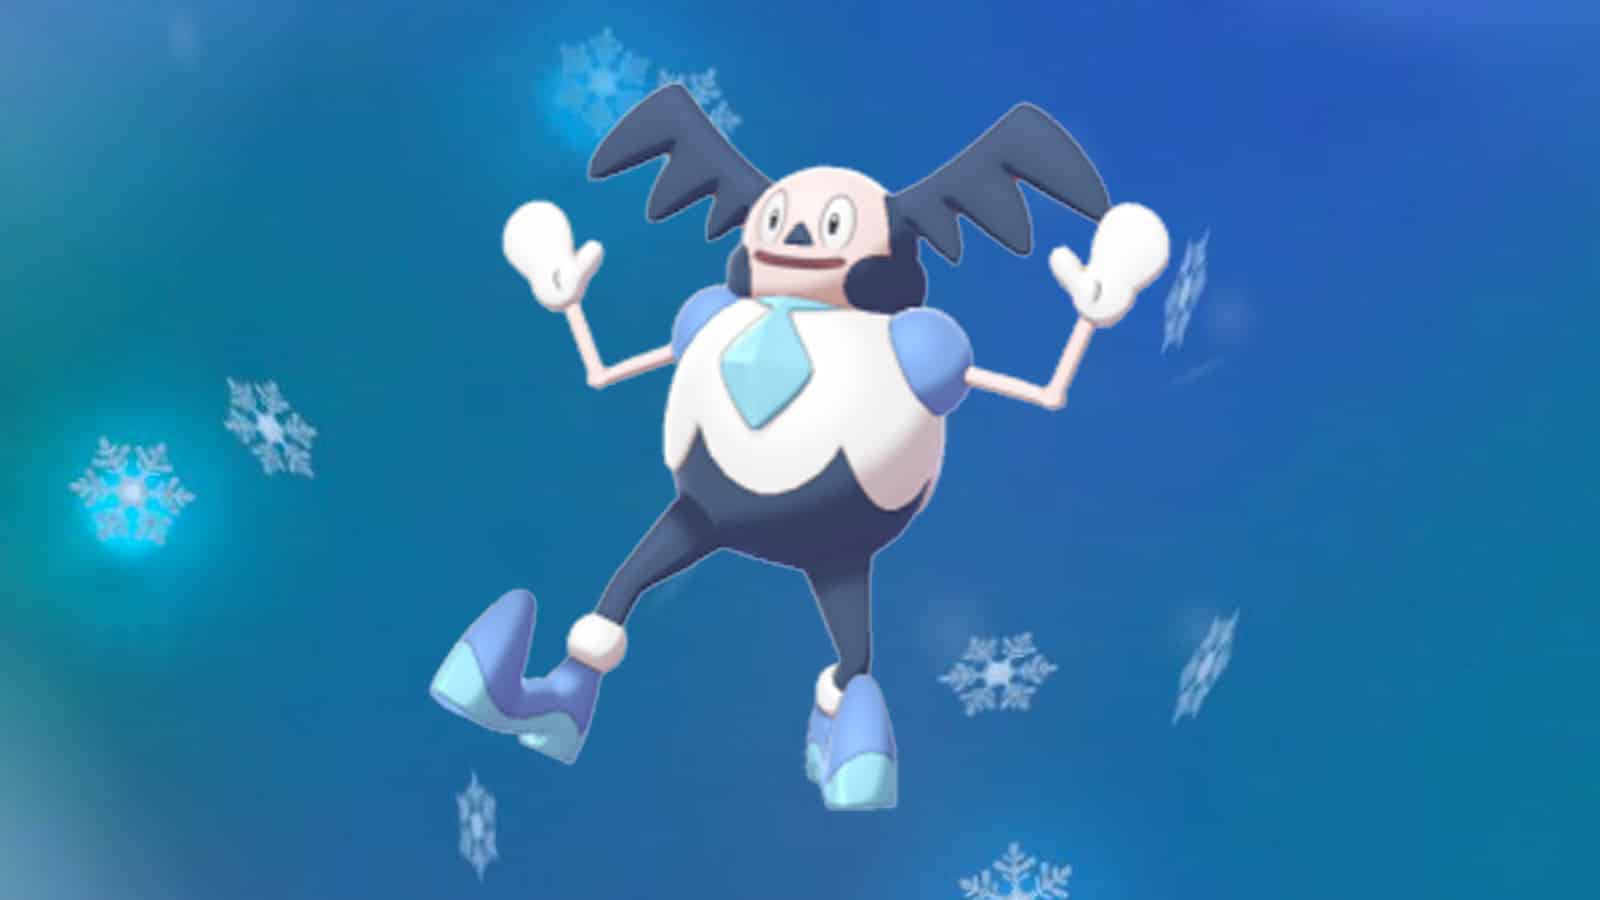 Pokemon Go Galarian mr mime as a Collection Challenge reward